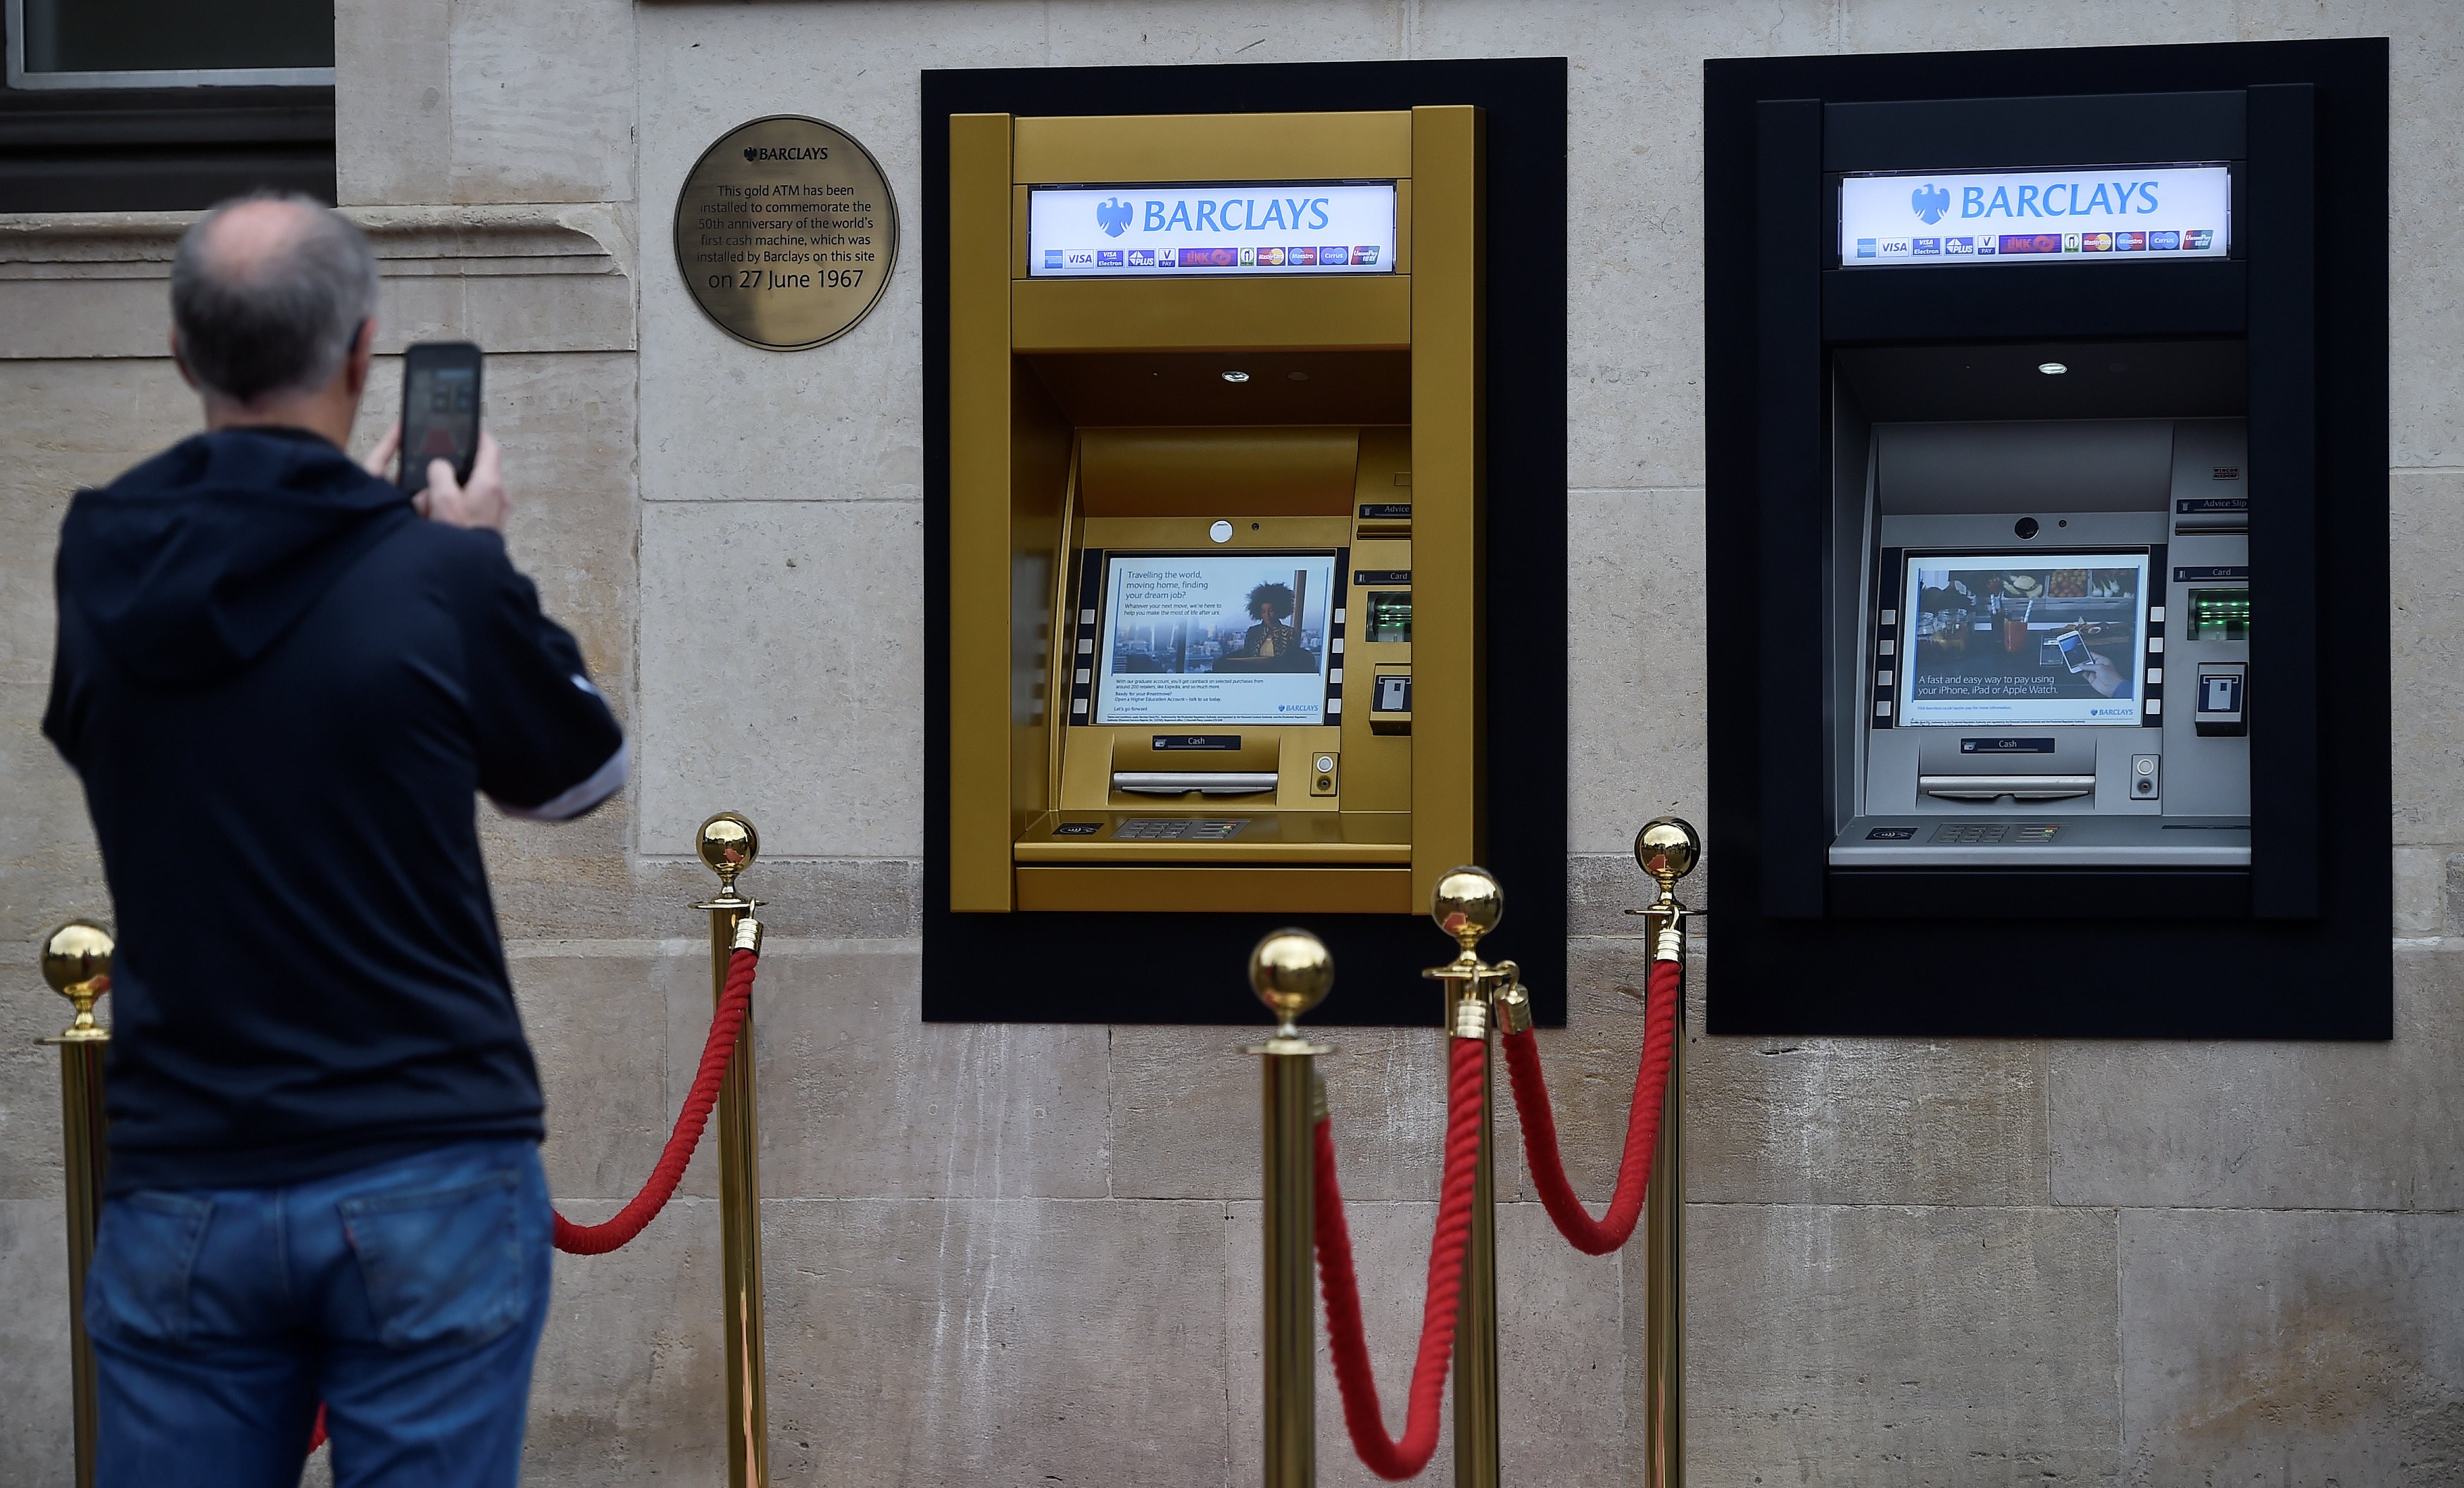 The first ATM was opened on June 27, 1967 at a branch of Barclays bank in London